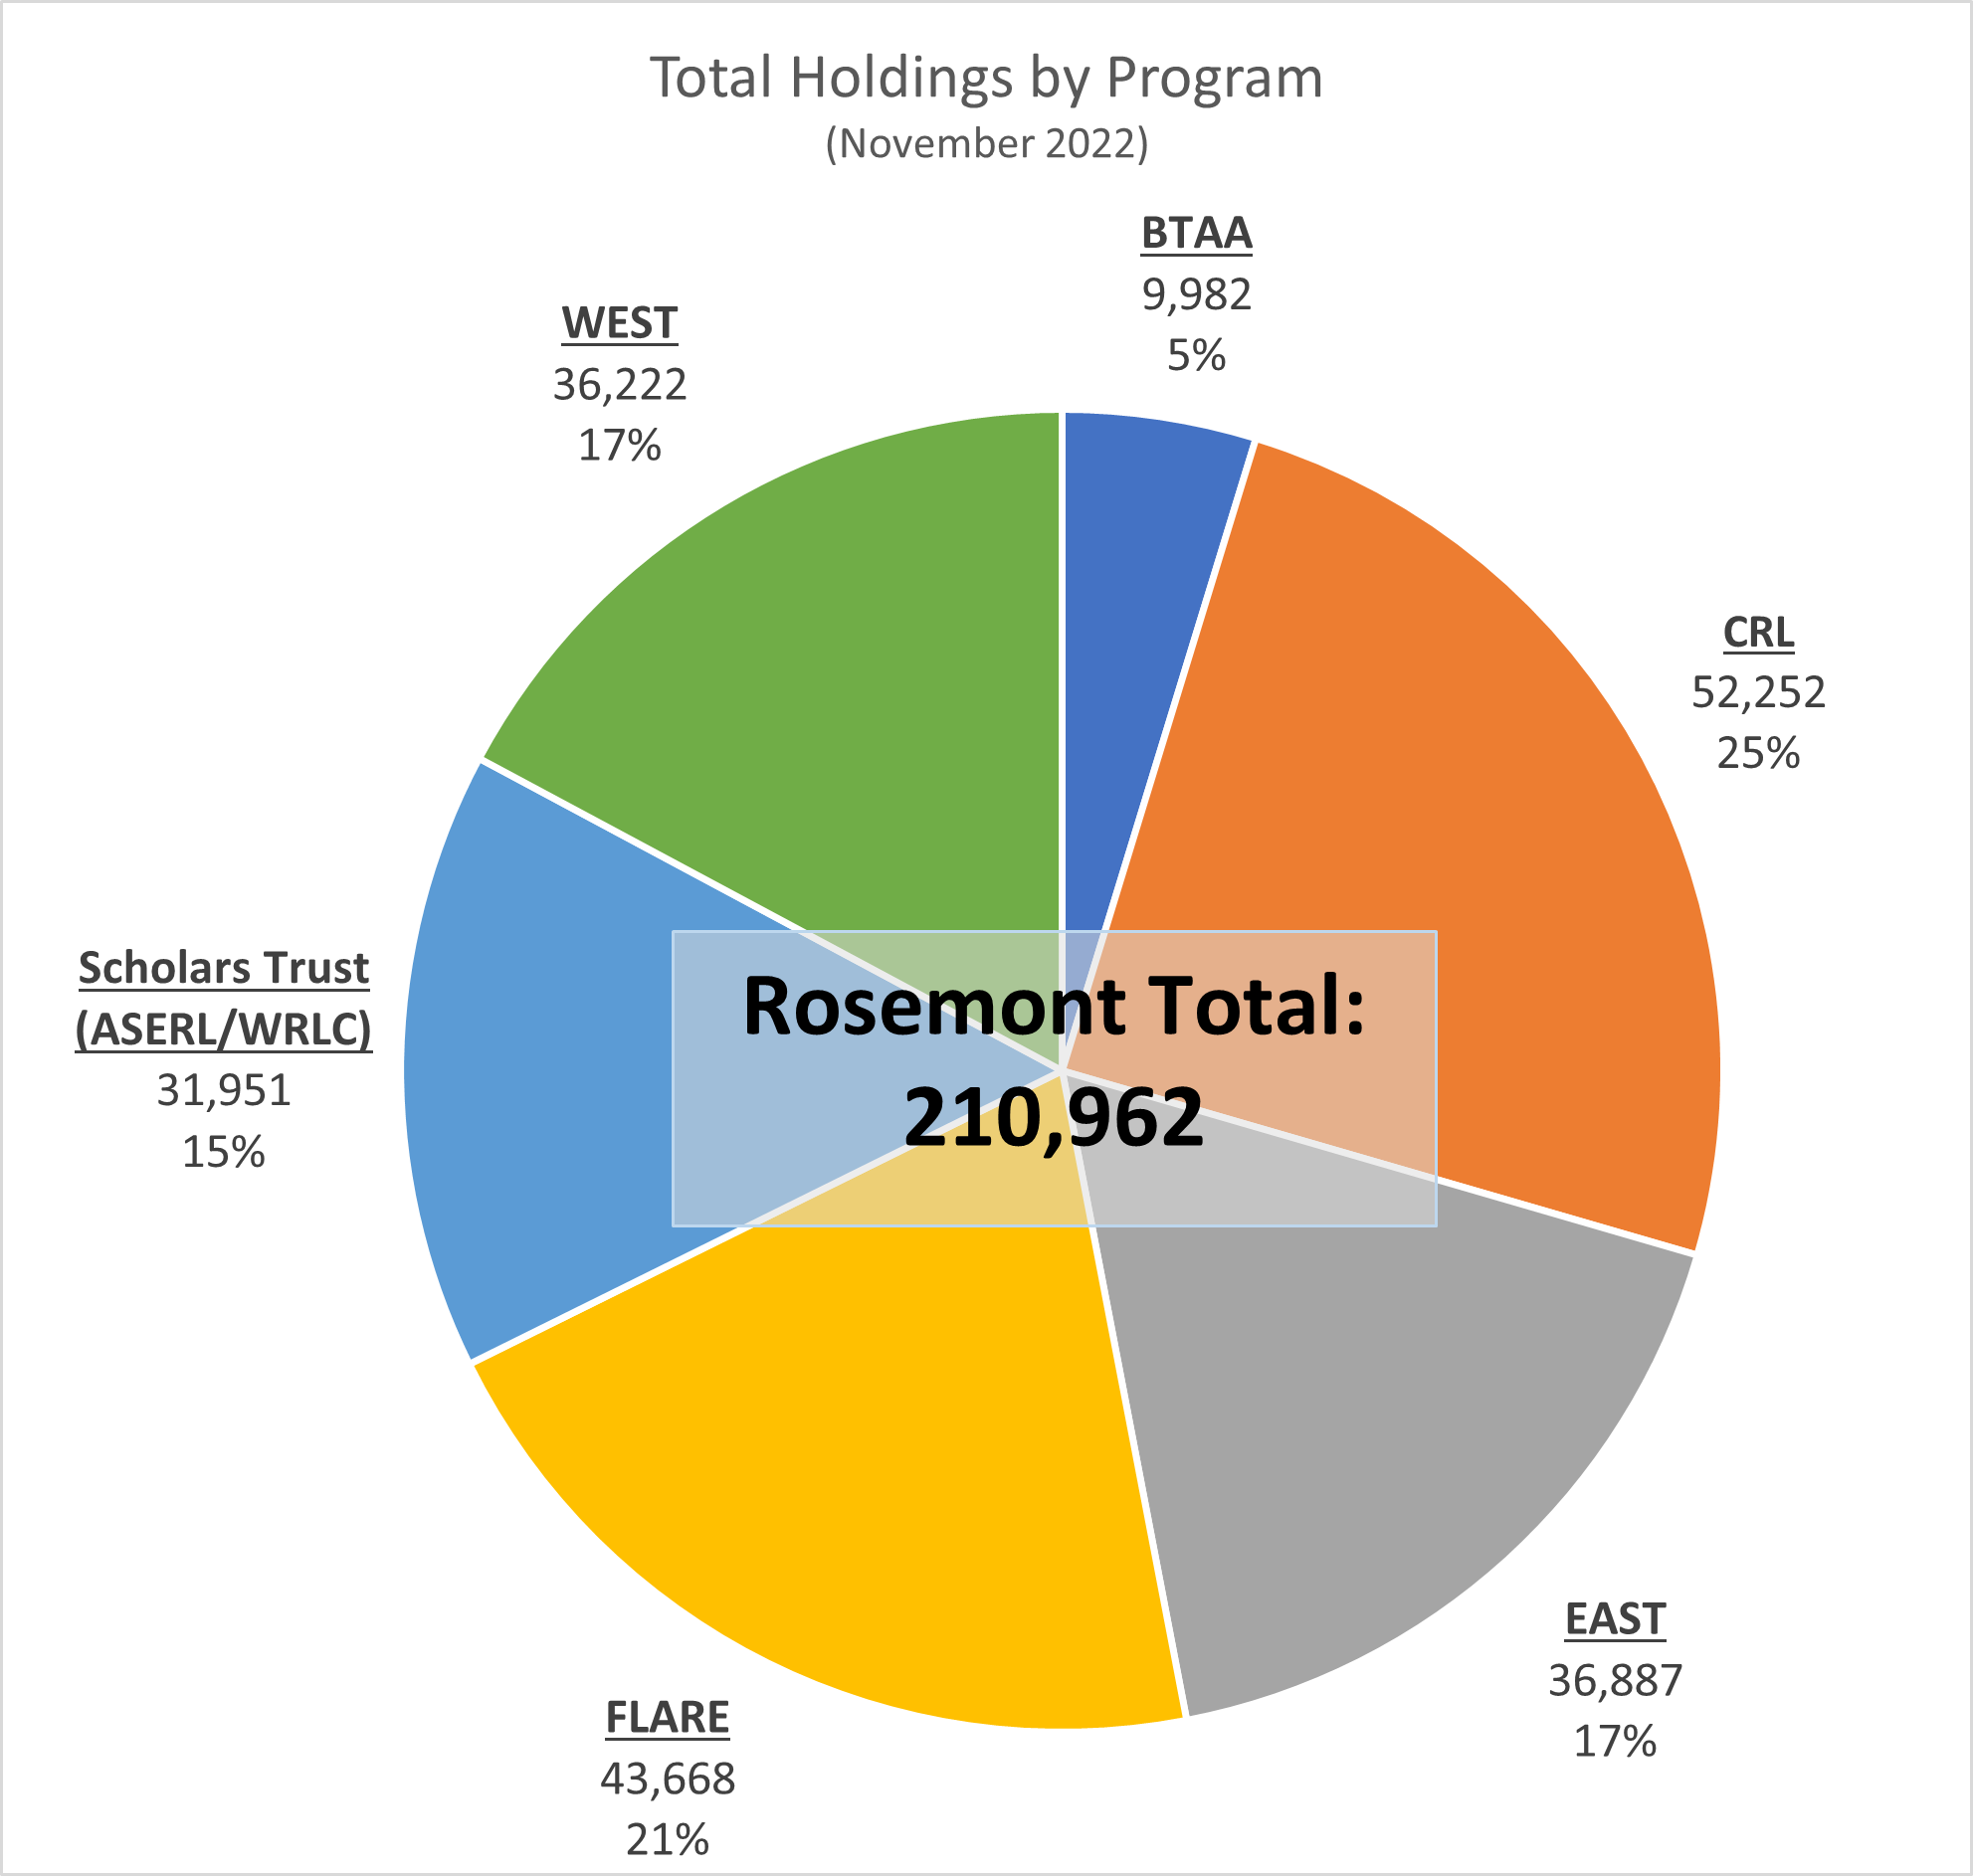 Total Holdings by Program: BTAA (9,982 holdings; 5% of total), CRL (52,252 holdings; 25% of total), EAST (36,887 holdings; 17% of total), FLARE (43,668 holdings; 21% of total), Scholars Trust (ASERL/WRLC) (31,951 holdings; 15% of total), WEST (36,222 holdings; 17% of total); Grand total = 210,962 holdings